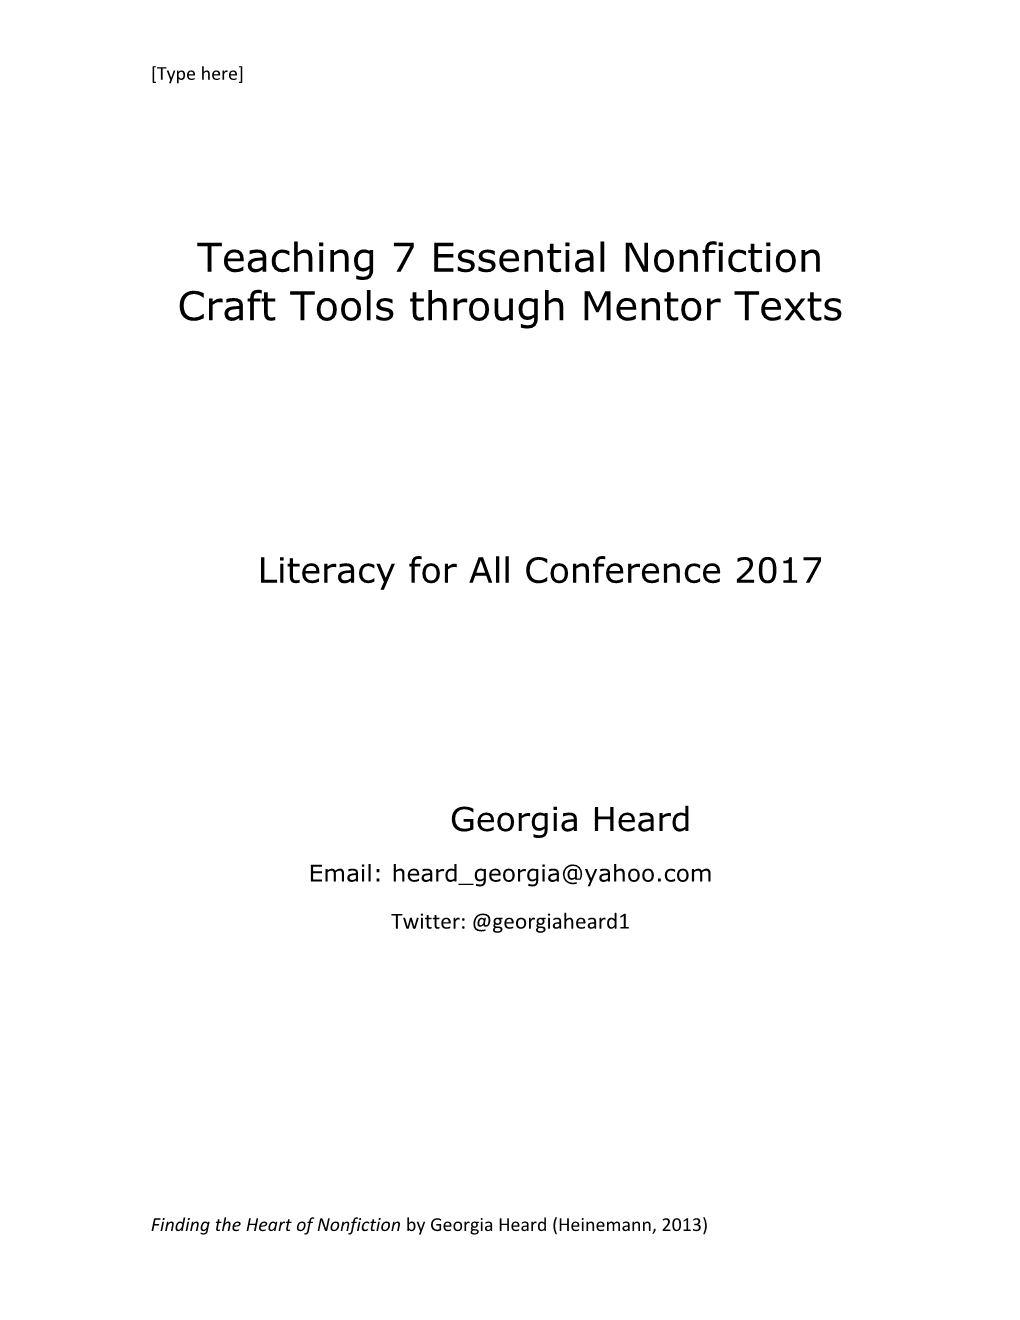 Teaching 7 Essential Nonfiction Craft Tools Through Mentor Texts